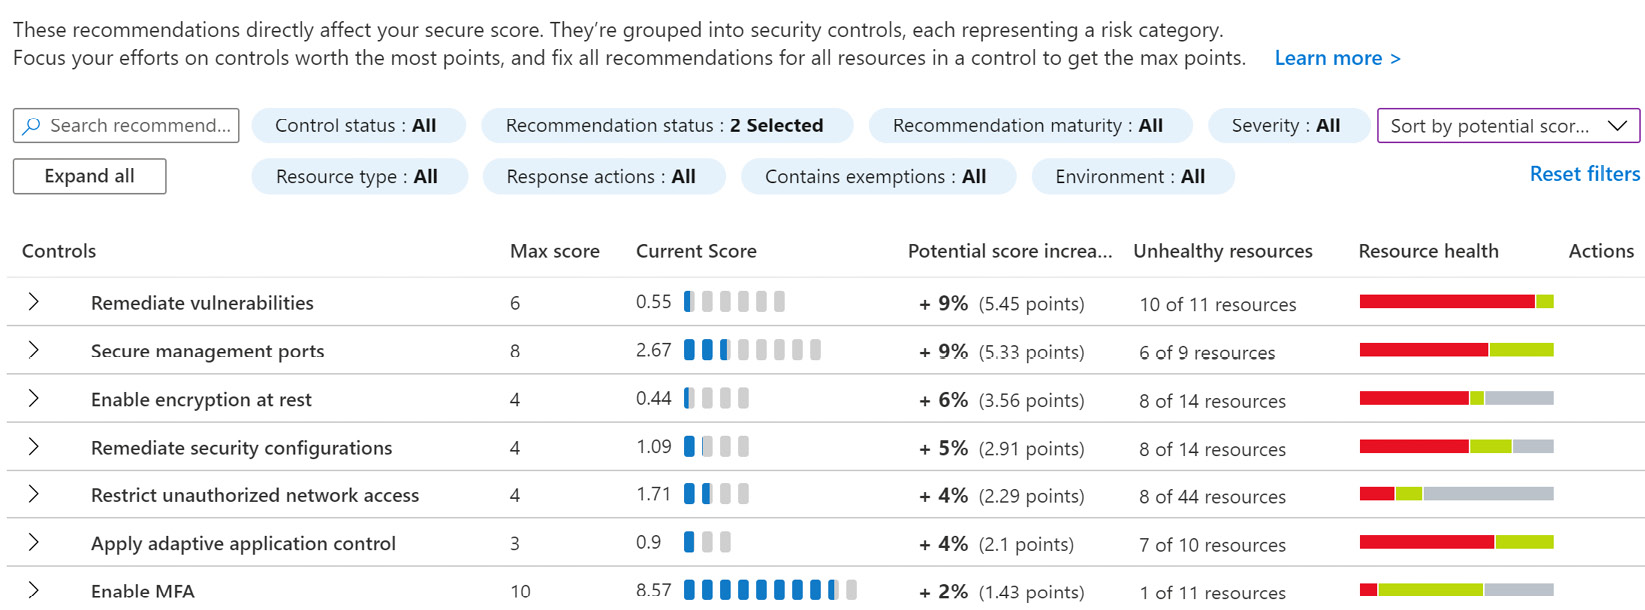 Figure 4.2 – Recommendations – sorted by potential score increase